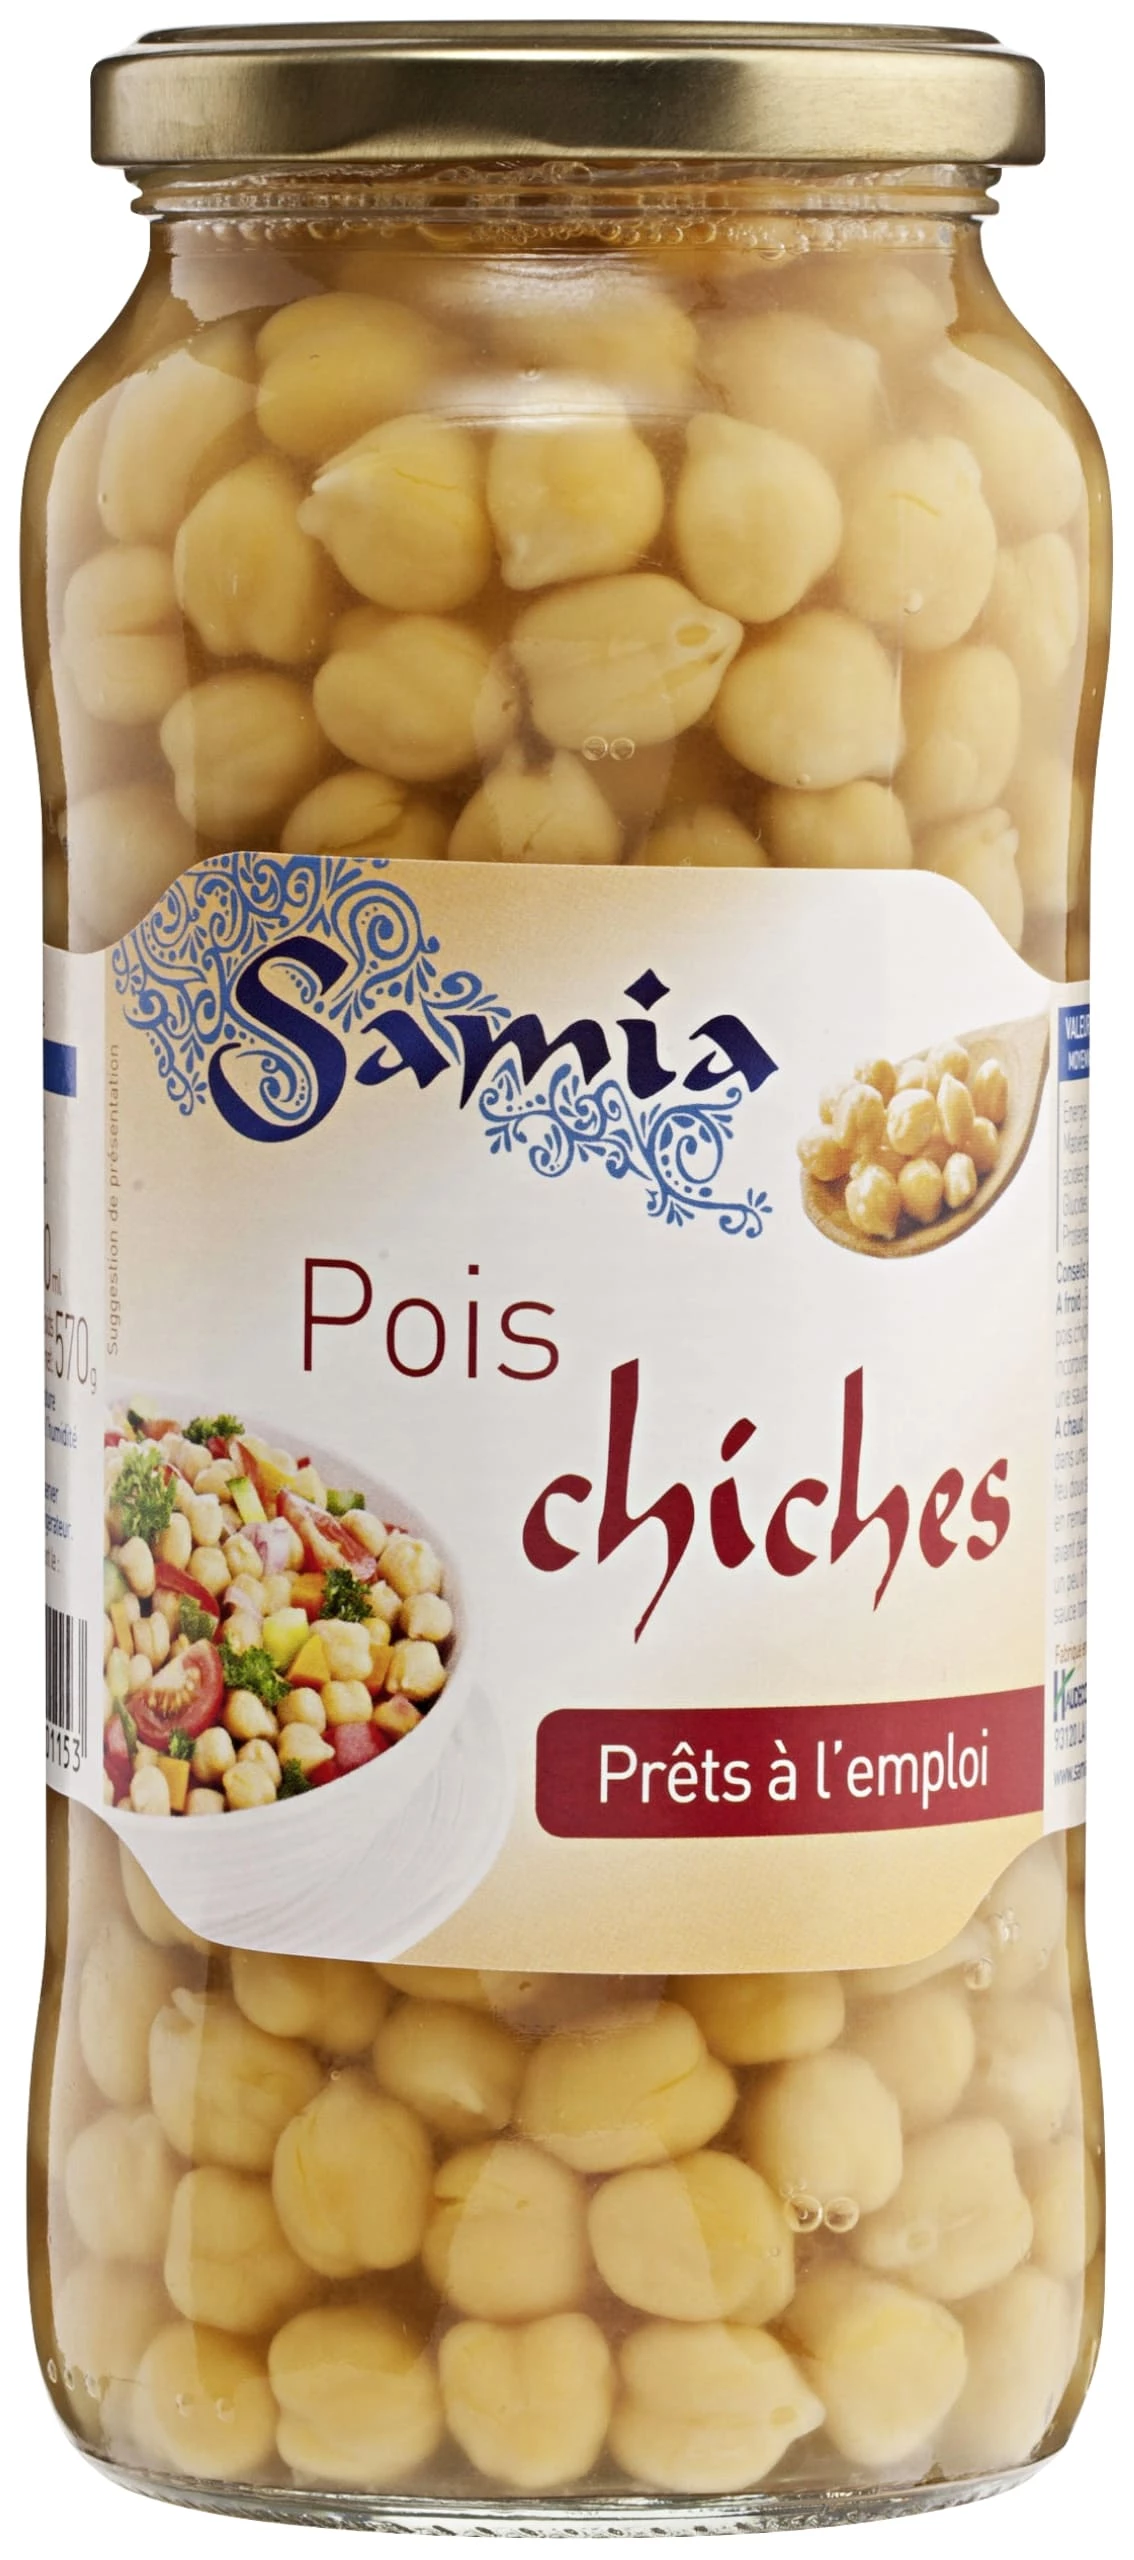 Pois Chiches Bocal 570g